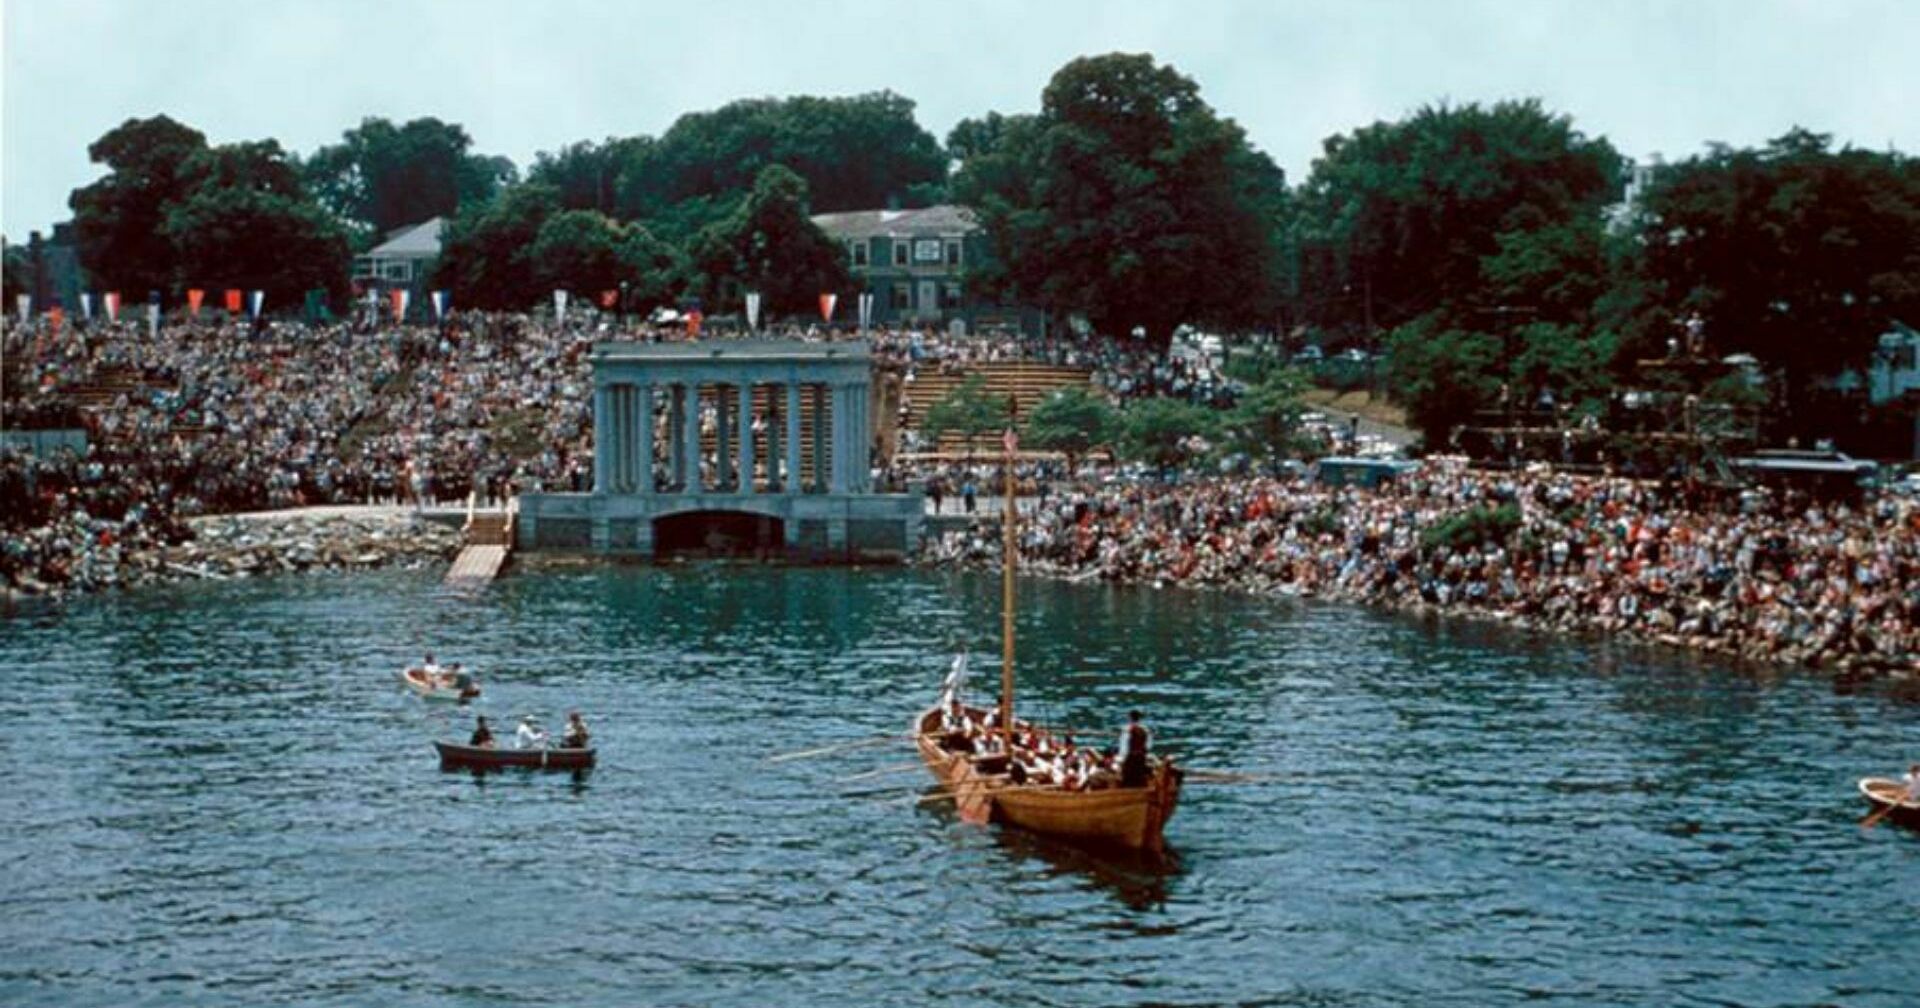 A shallop is rowed towards Plymouth Rock while a crowd of spectators looks on